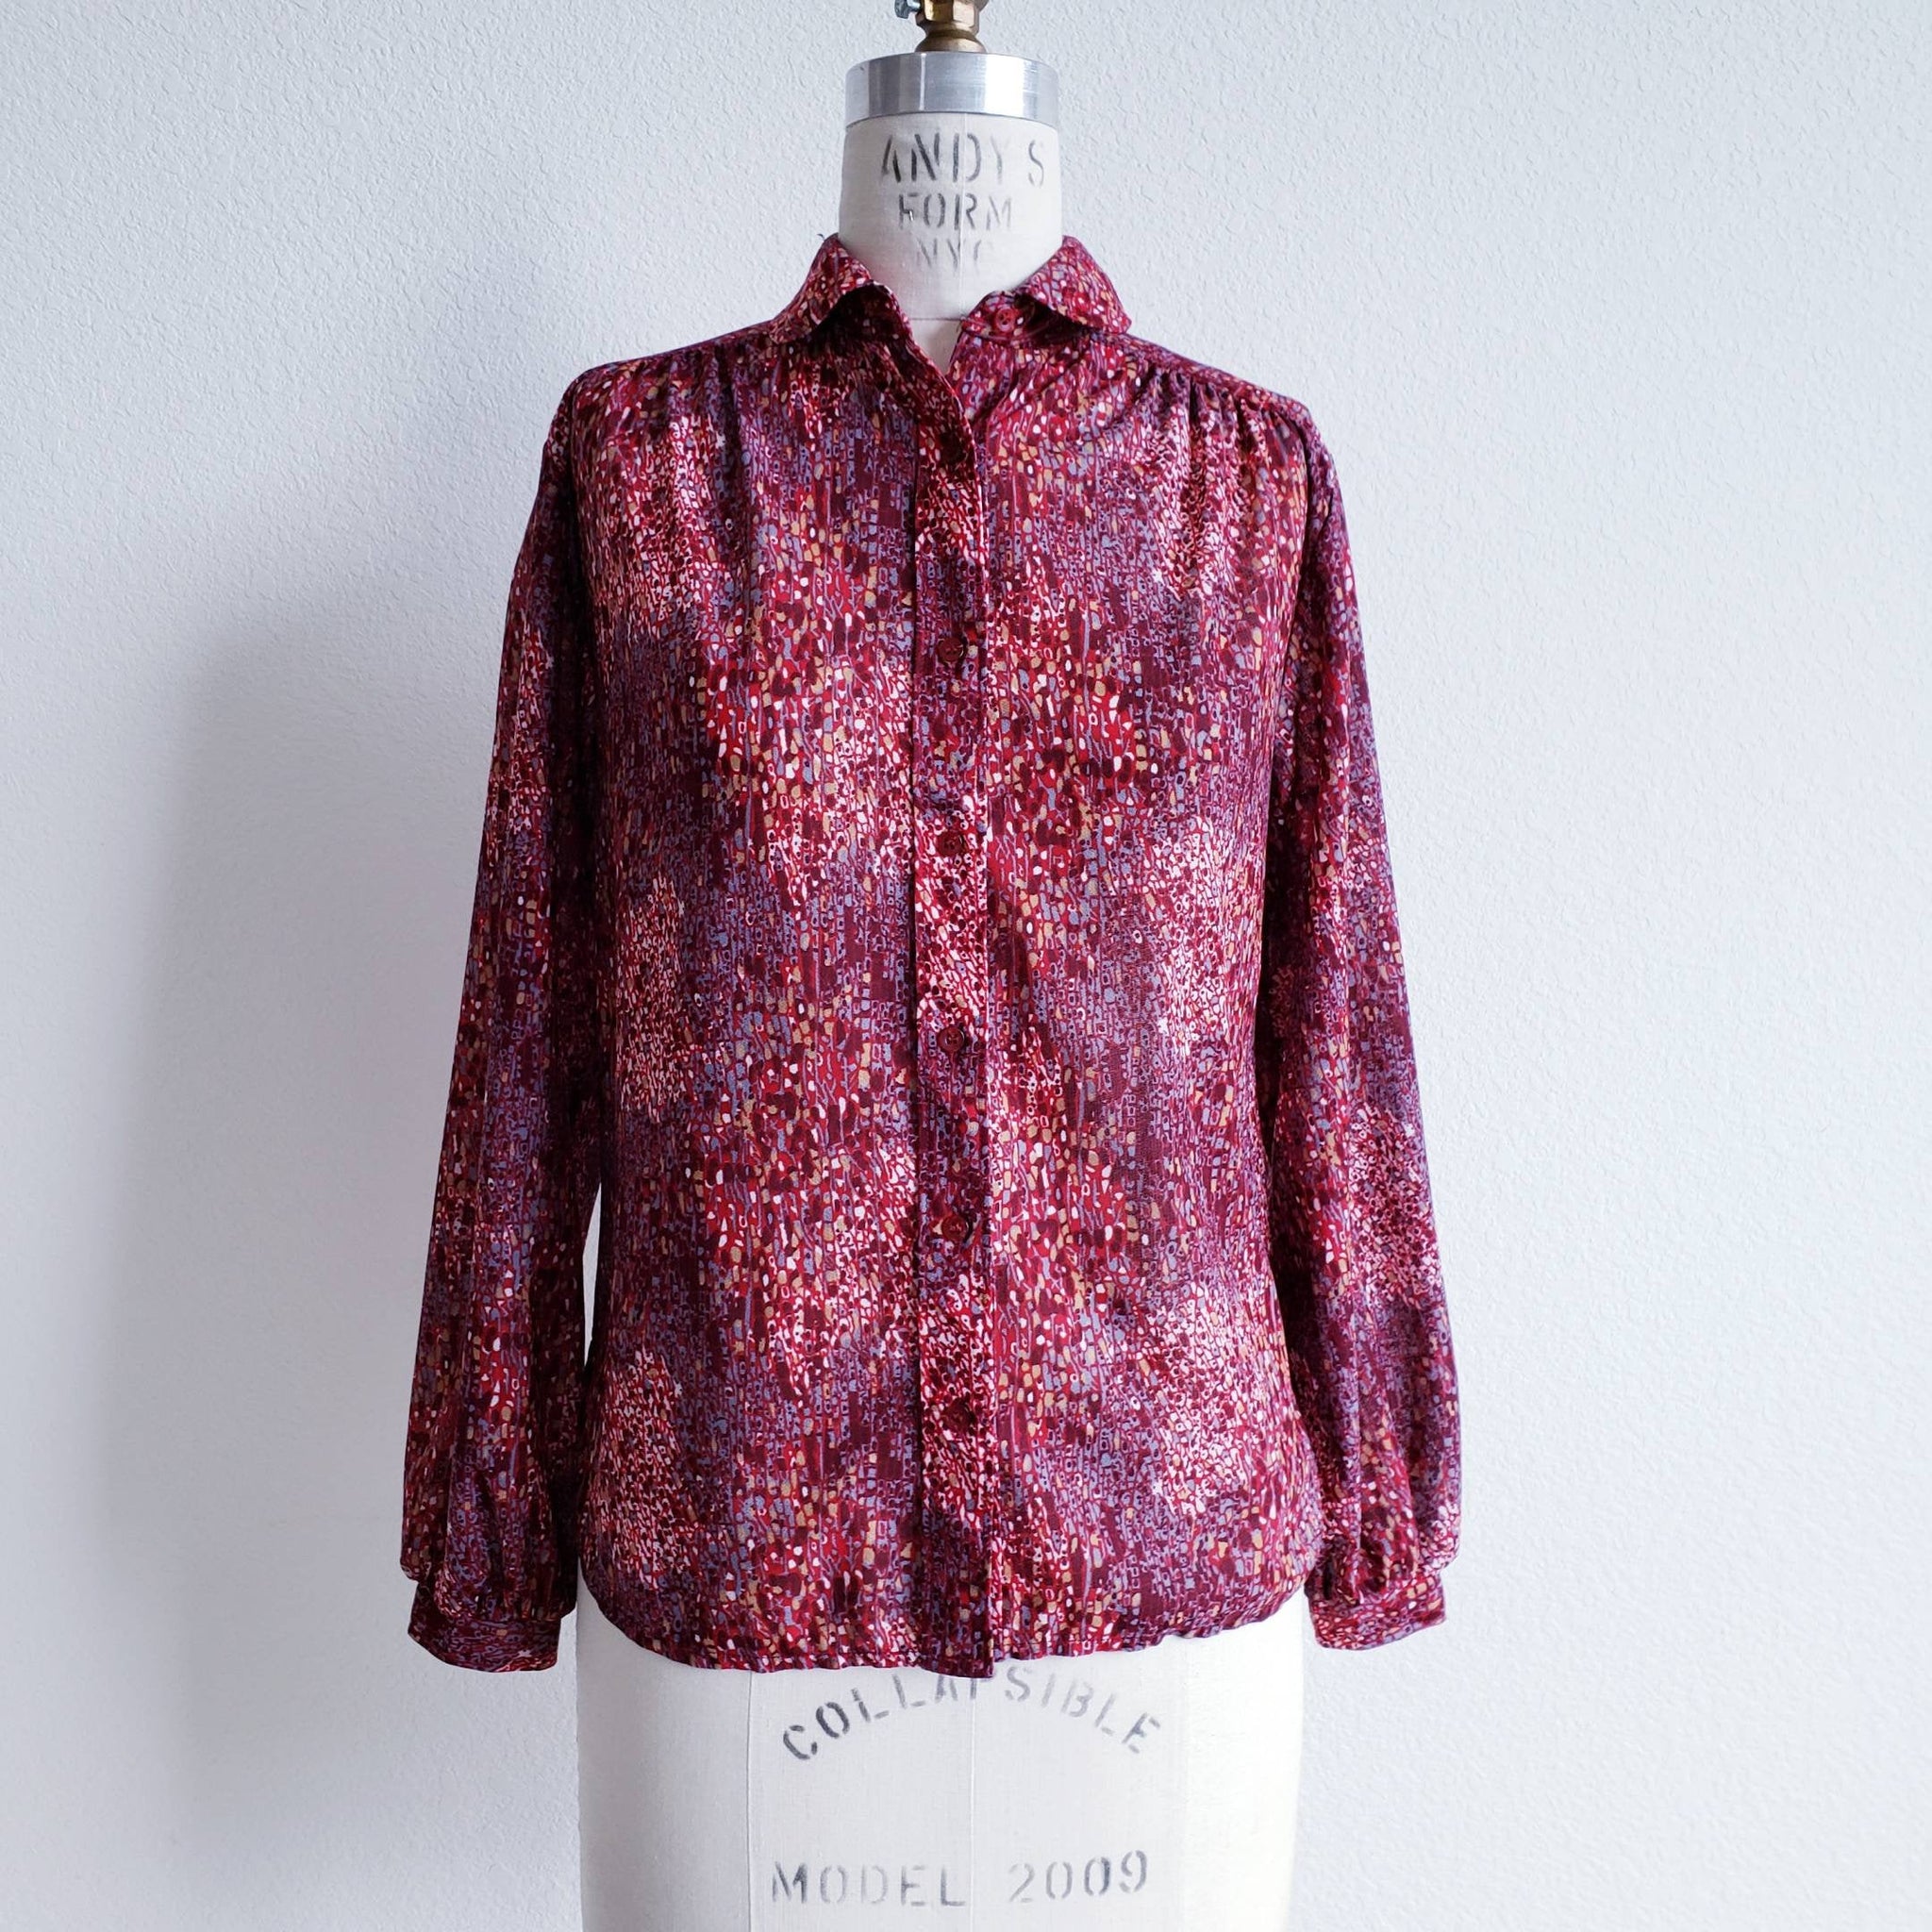 Vintage 70s/80s Maroon Abrstract Print Polyester Knits For Joyce Blouse - ChicCityVintage